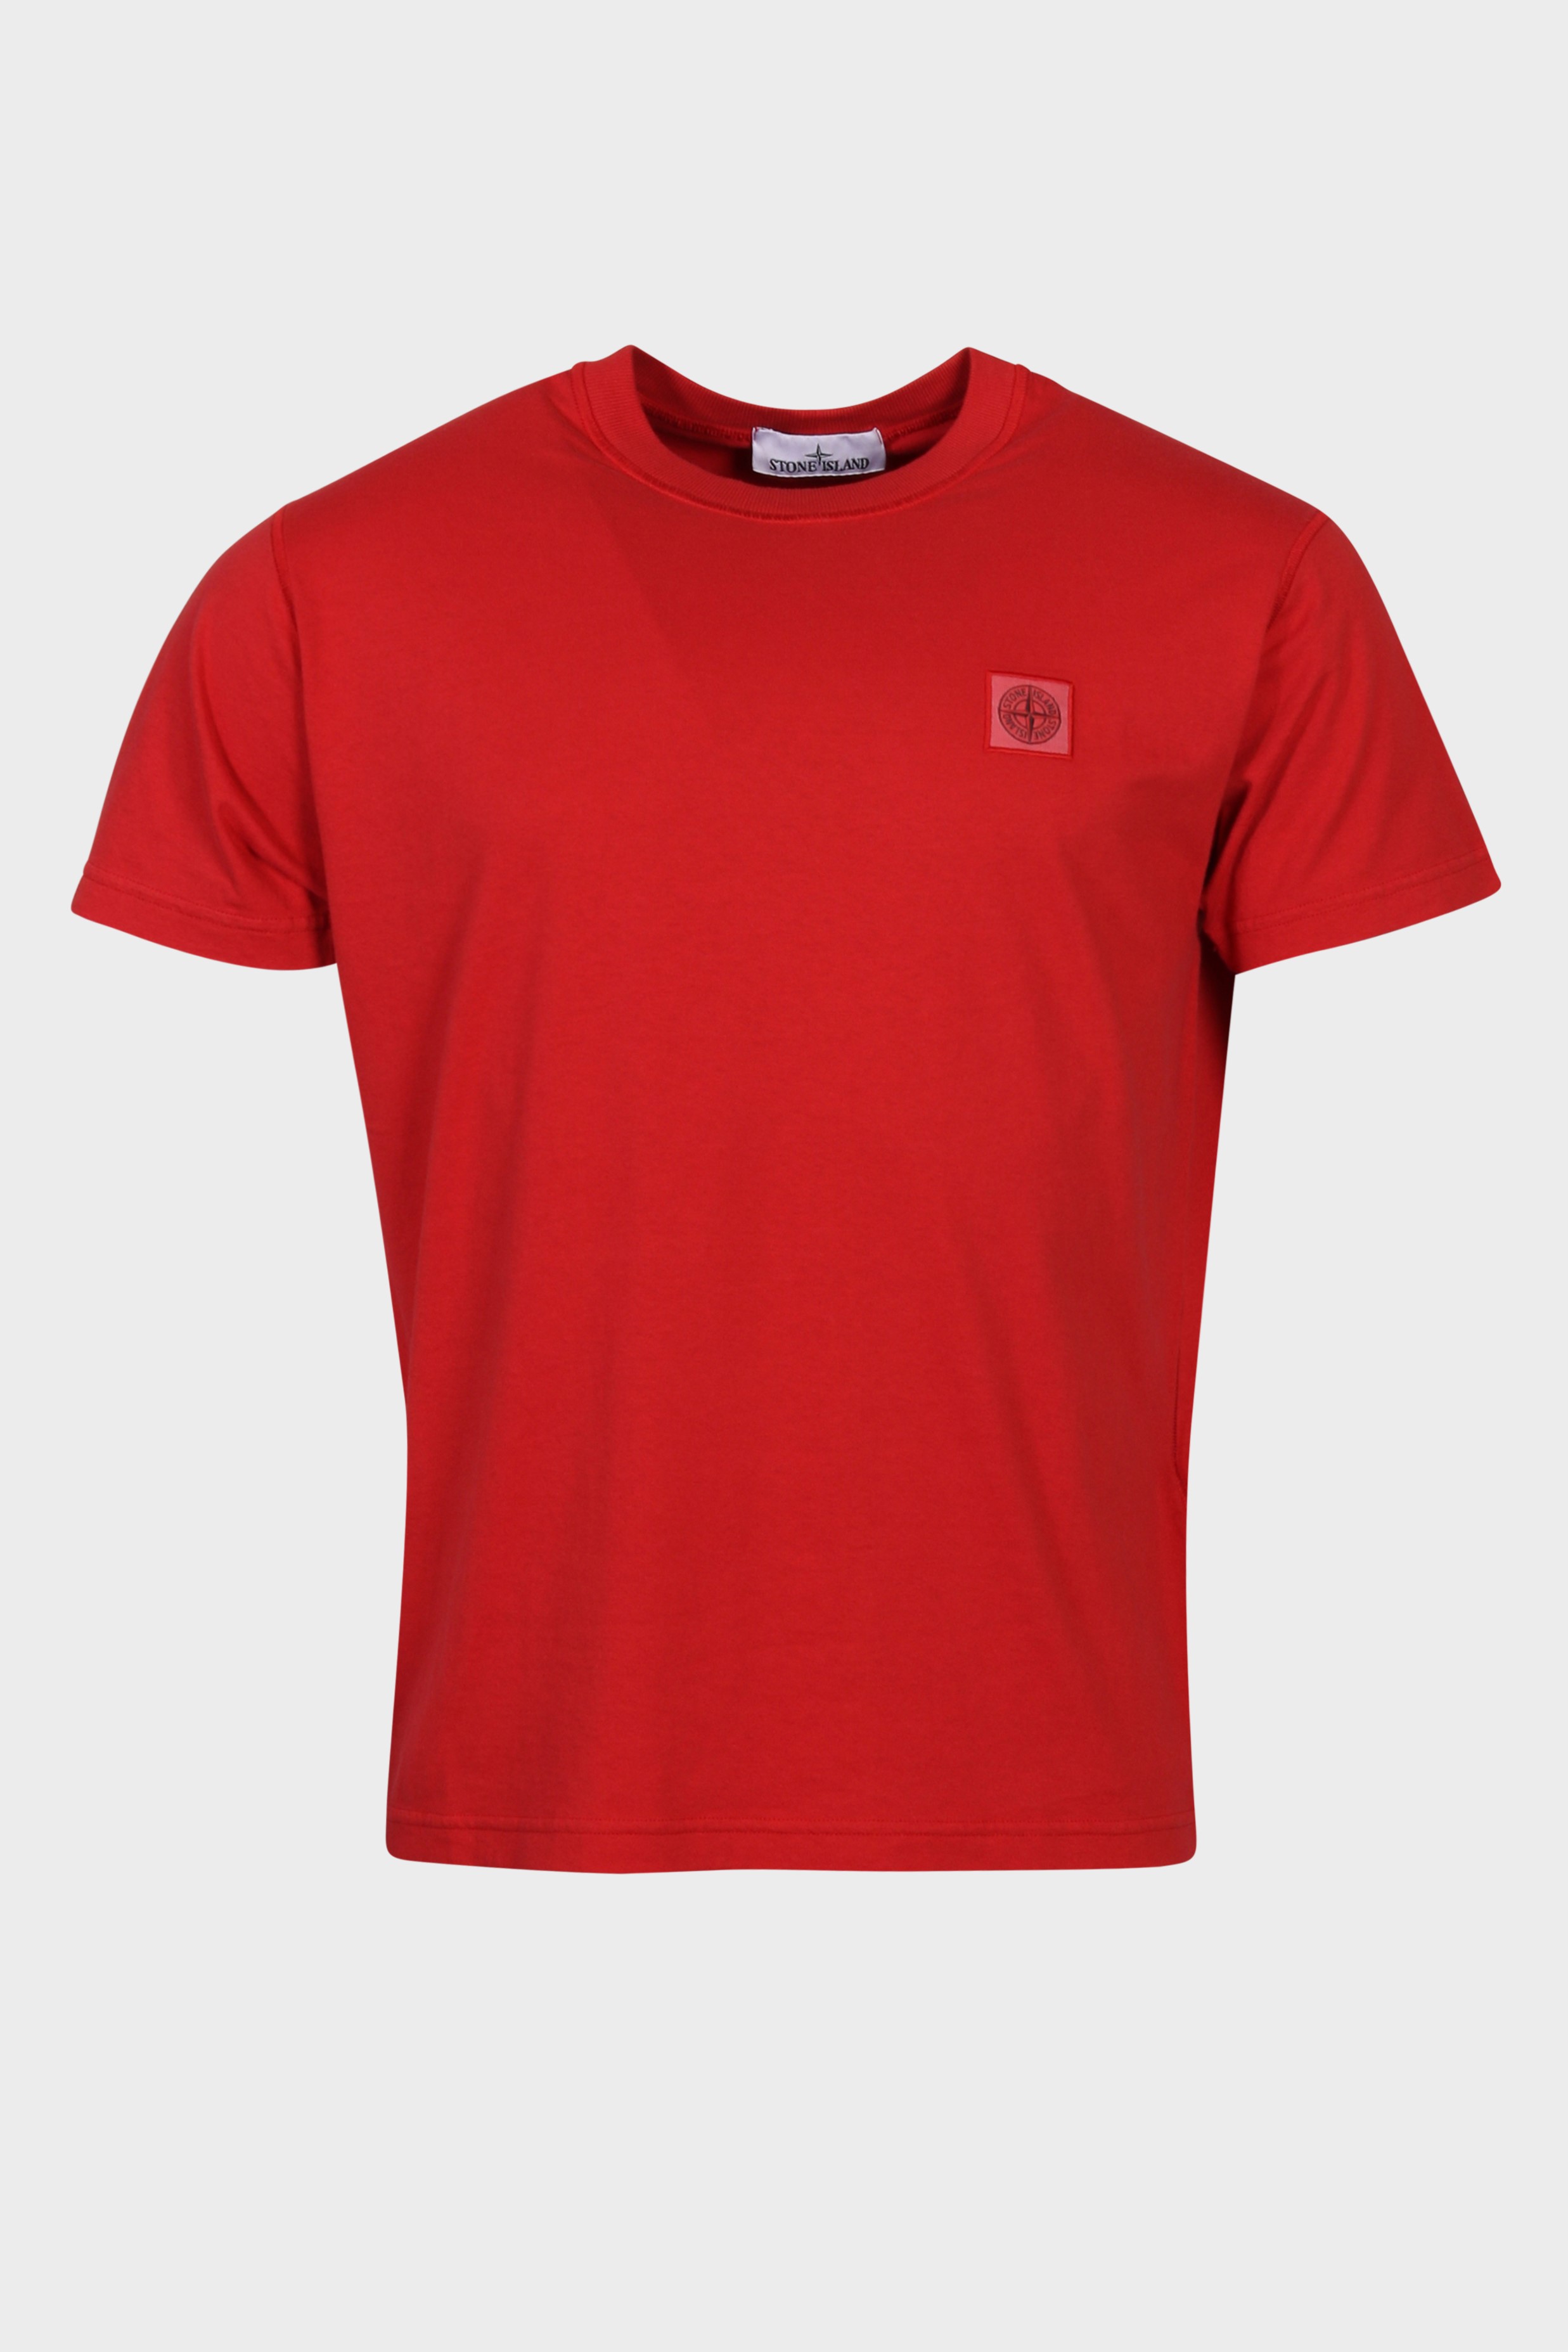 STONE ISLAND T-Shirt in Red